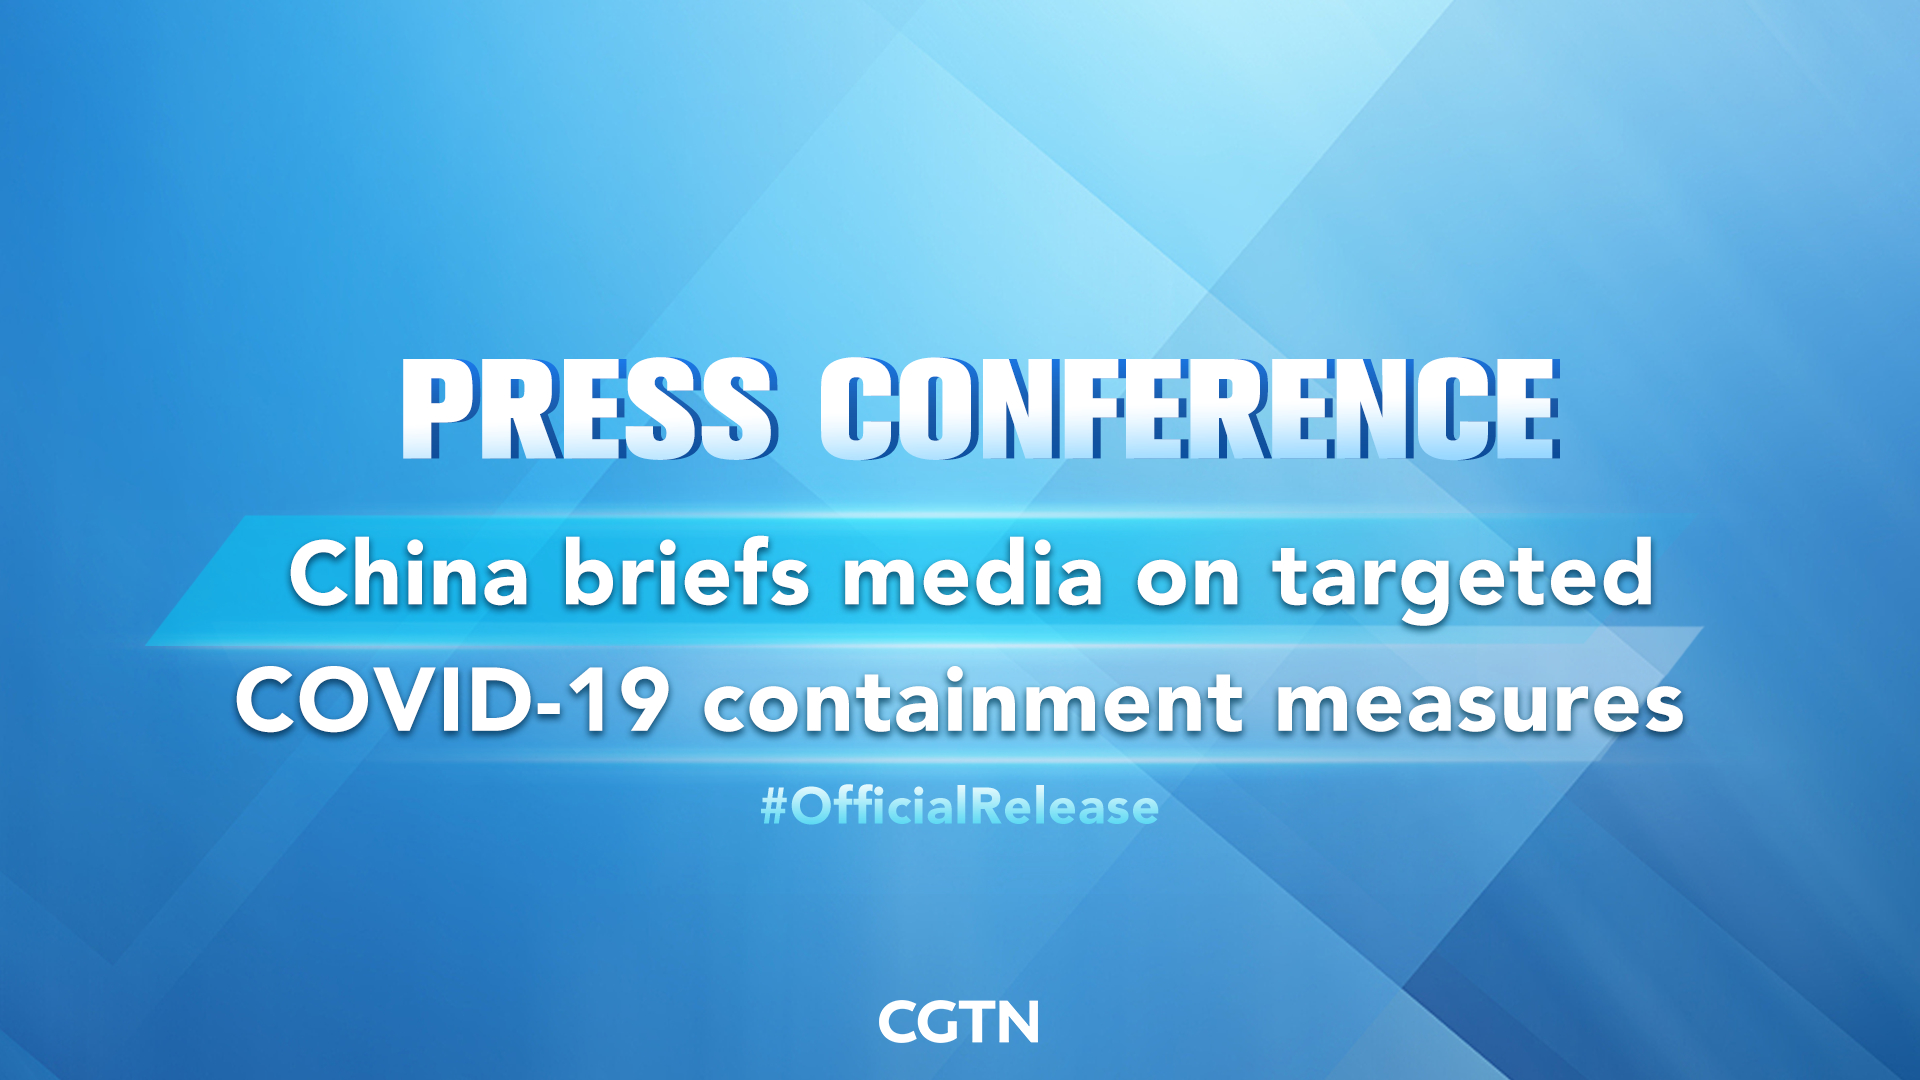 Live: China briefs media on targeted COVID-19 containment measures